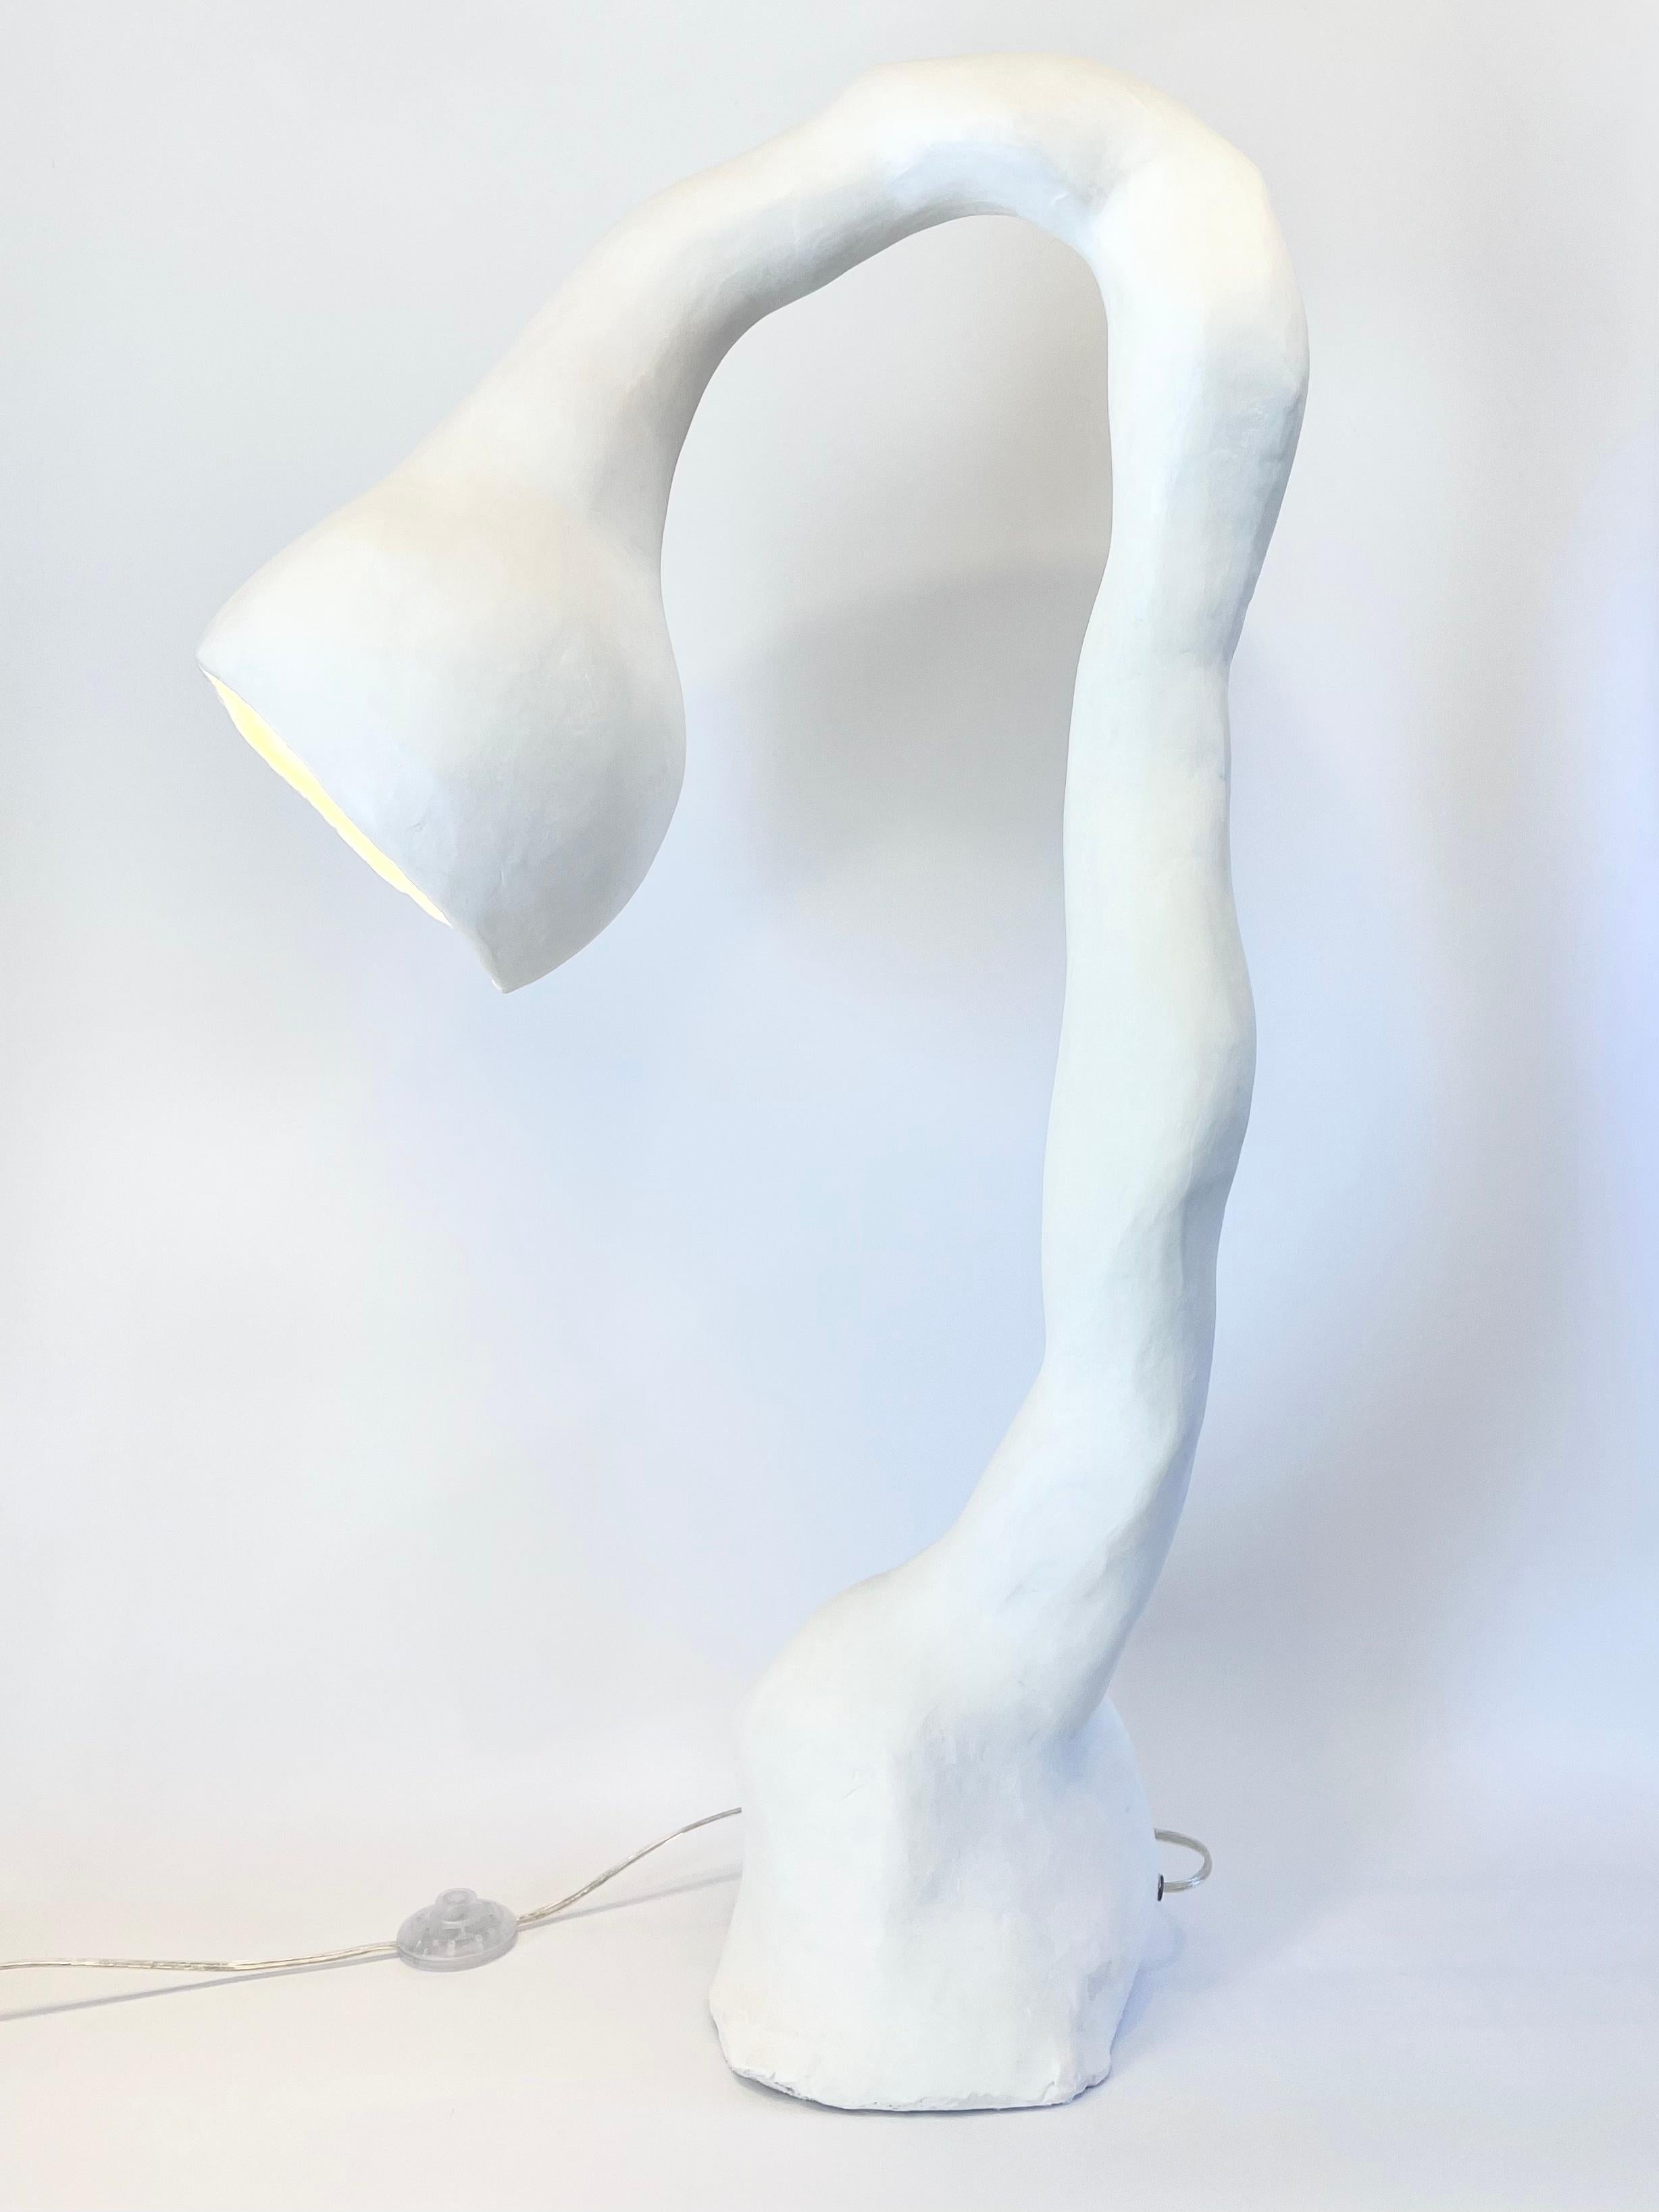 Carved Biomorphic Floor Lamp N.5 by Studio Chora, Standing Light, White Stone, In Stock For Sale